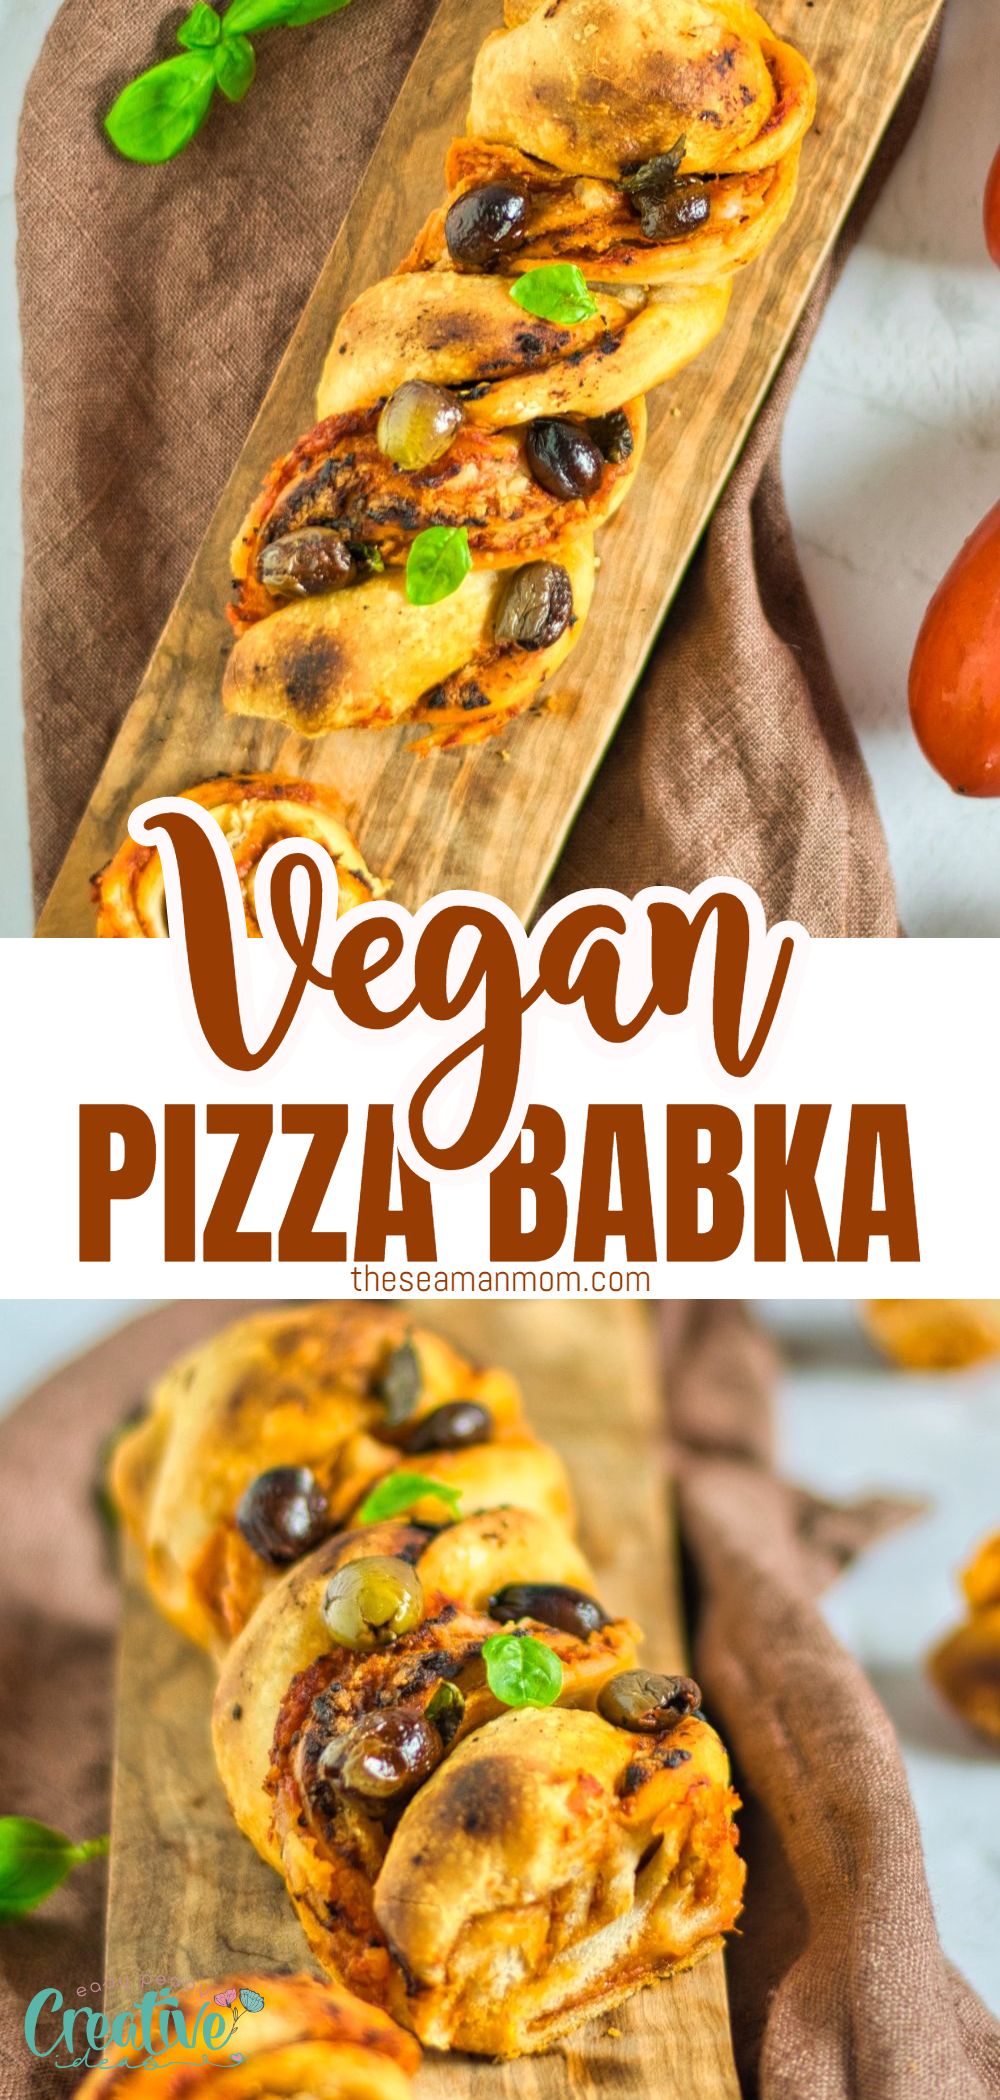 This vegan pizza babka is the perfect treat for a weekend brunch. It’s made with a pizza dough, filled with tomato sauce, sun dried tomato paste, vegan cheese and basil. The result is a delicious bread that tastes just like pizza – but without any dairy or meat products! You can even make it ahead of time so you have something to look forward to on your lazy Saturday morning. via @petroneagu